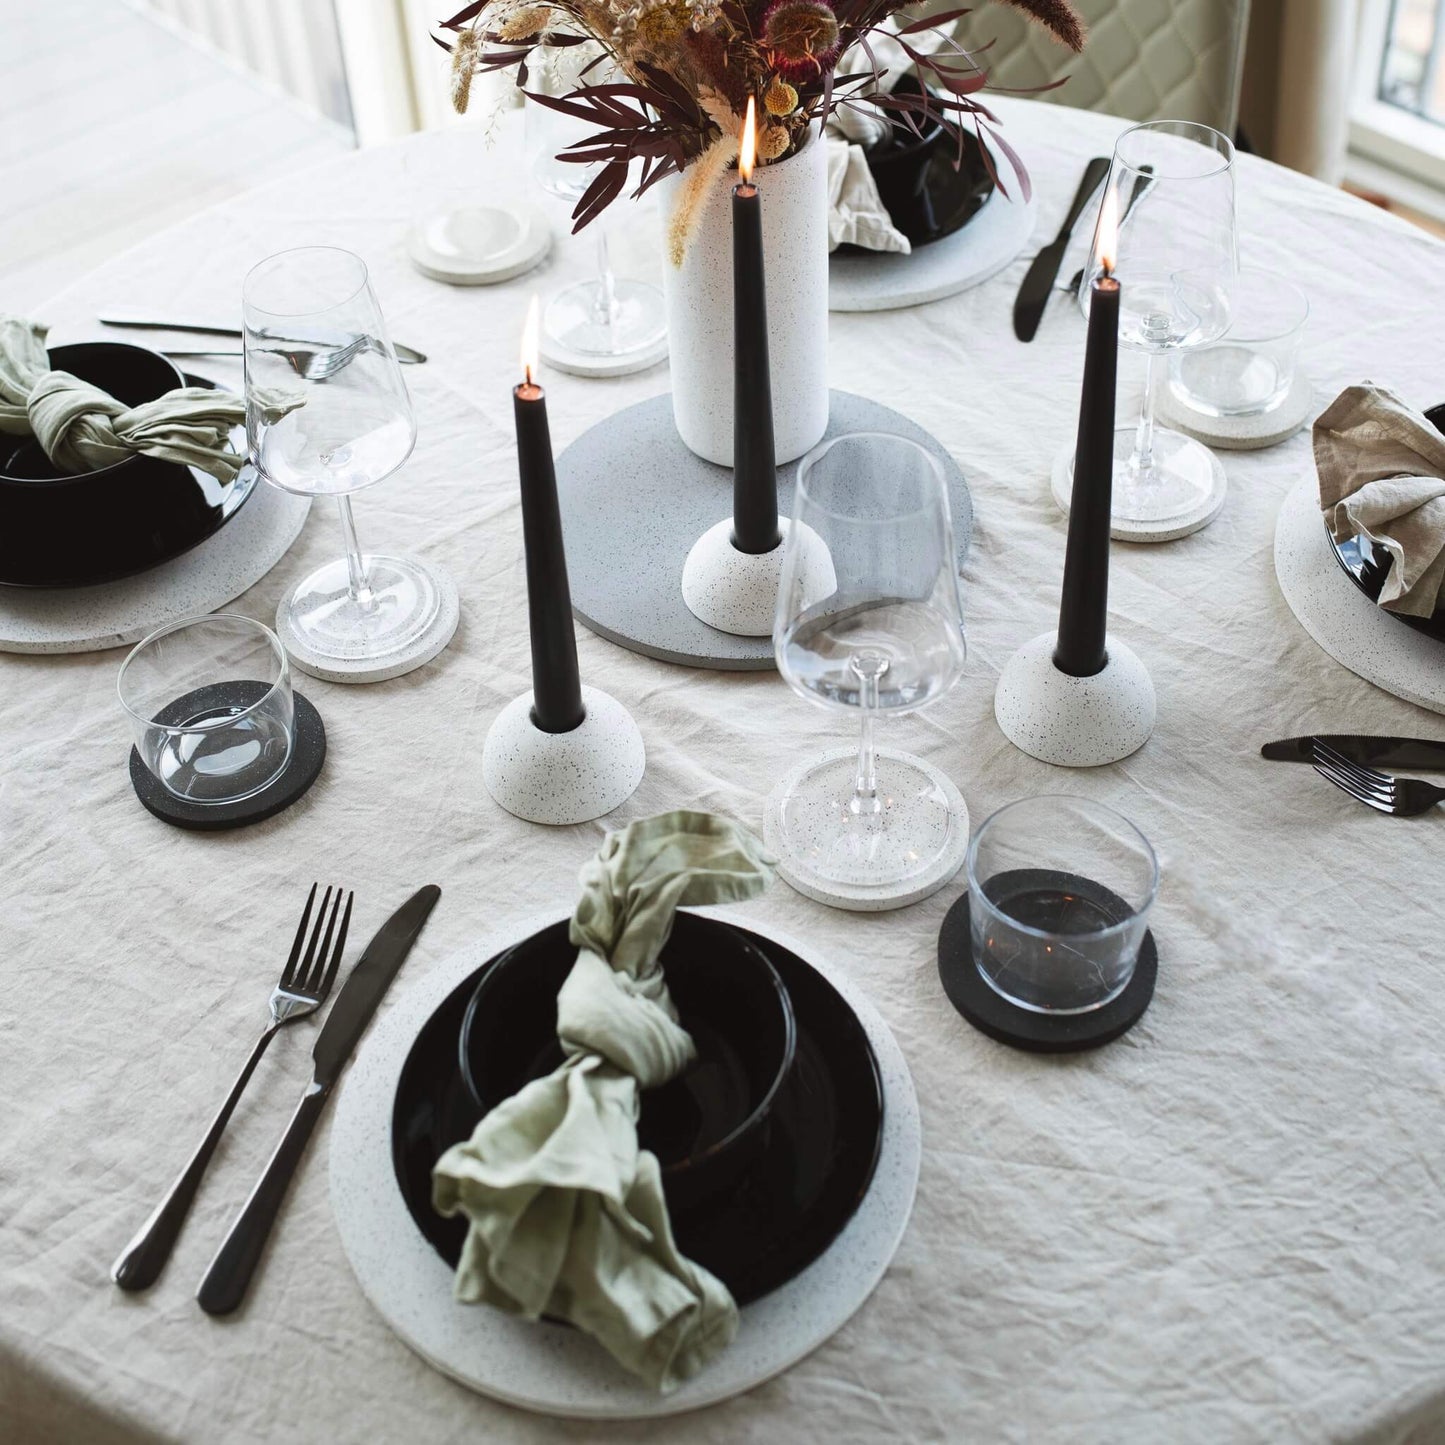 selection of white eco concrete candlesticks, placemats and coasters, in a tablesetting